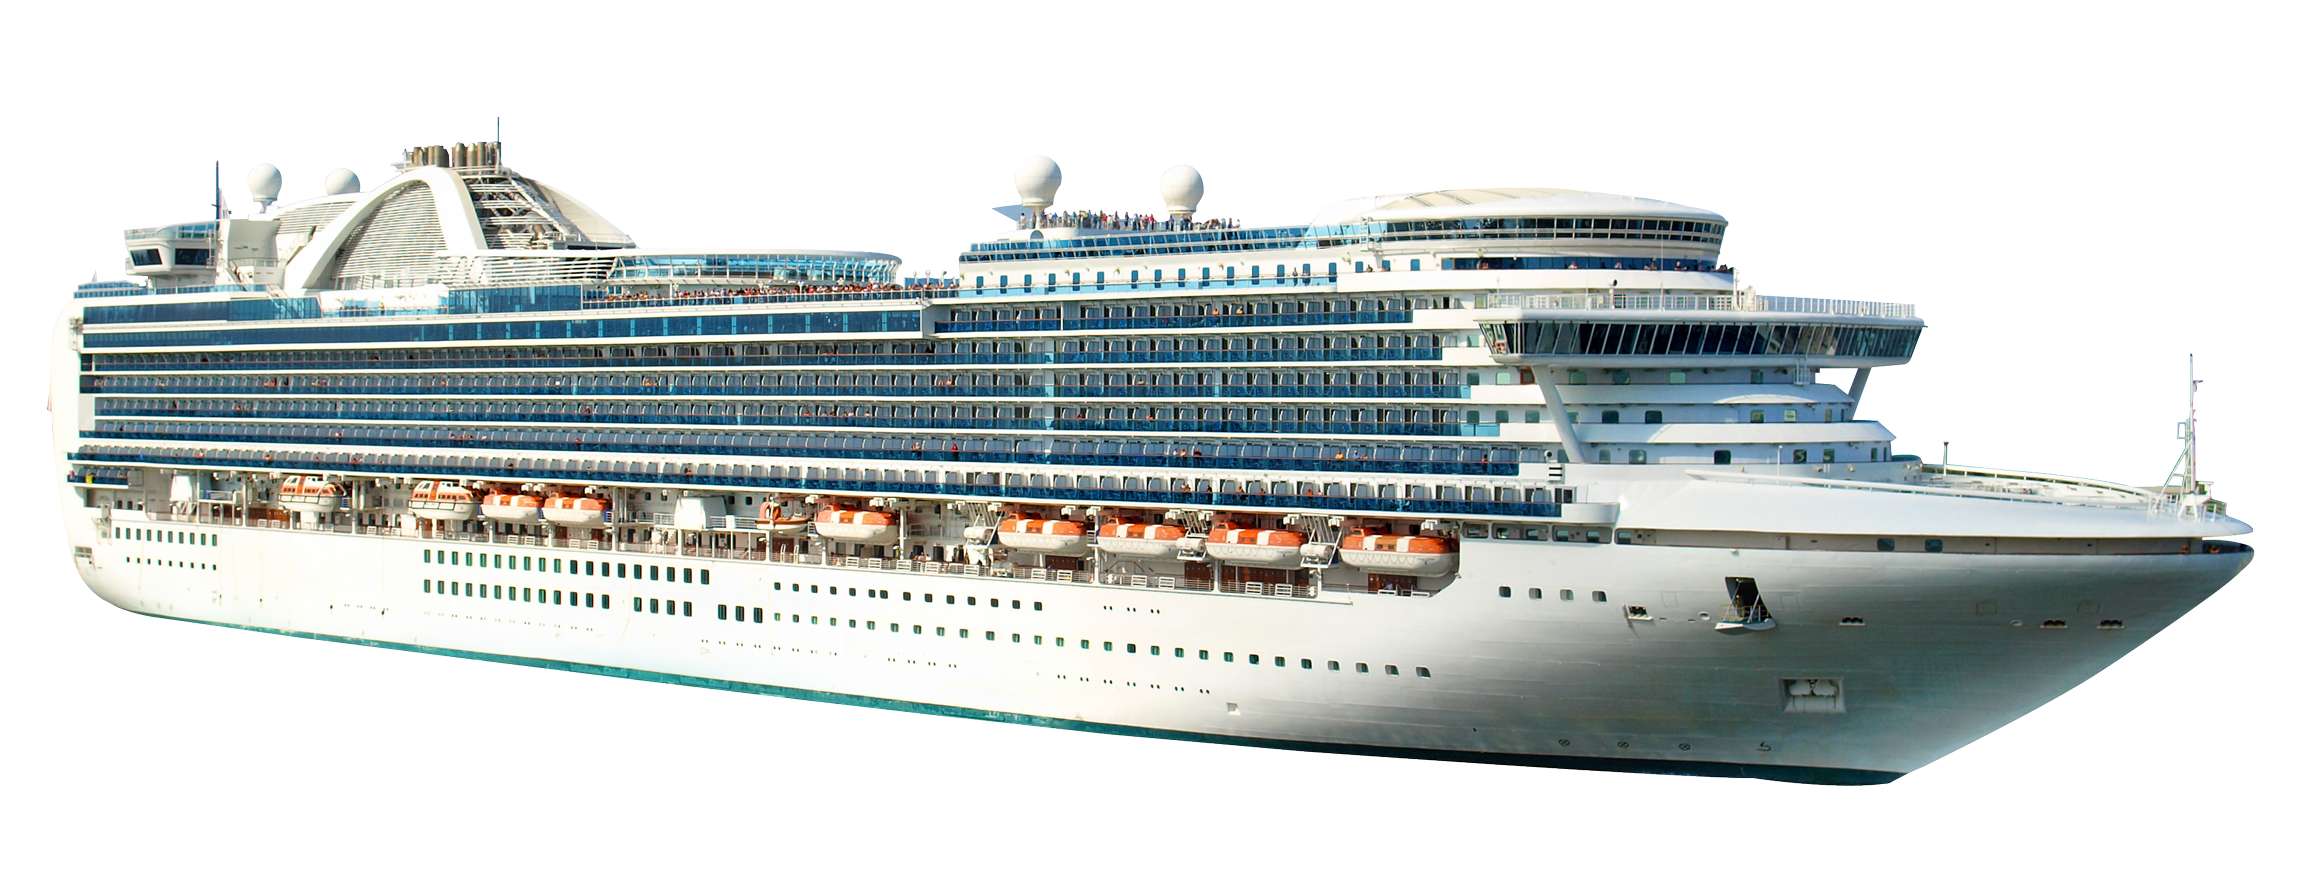 Cruise Ship PNG Image - PurePNG | Free transparent CC0 PNG Image Library